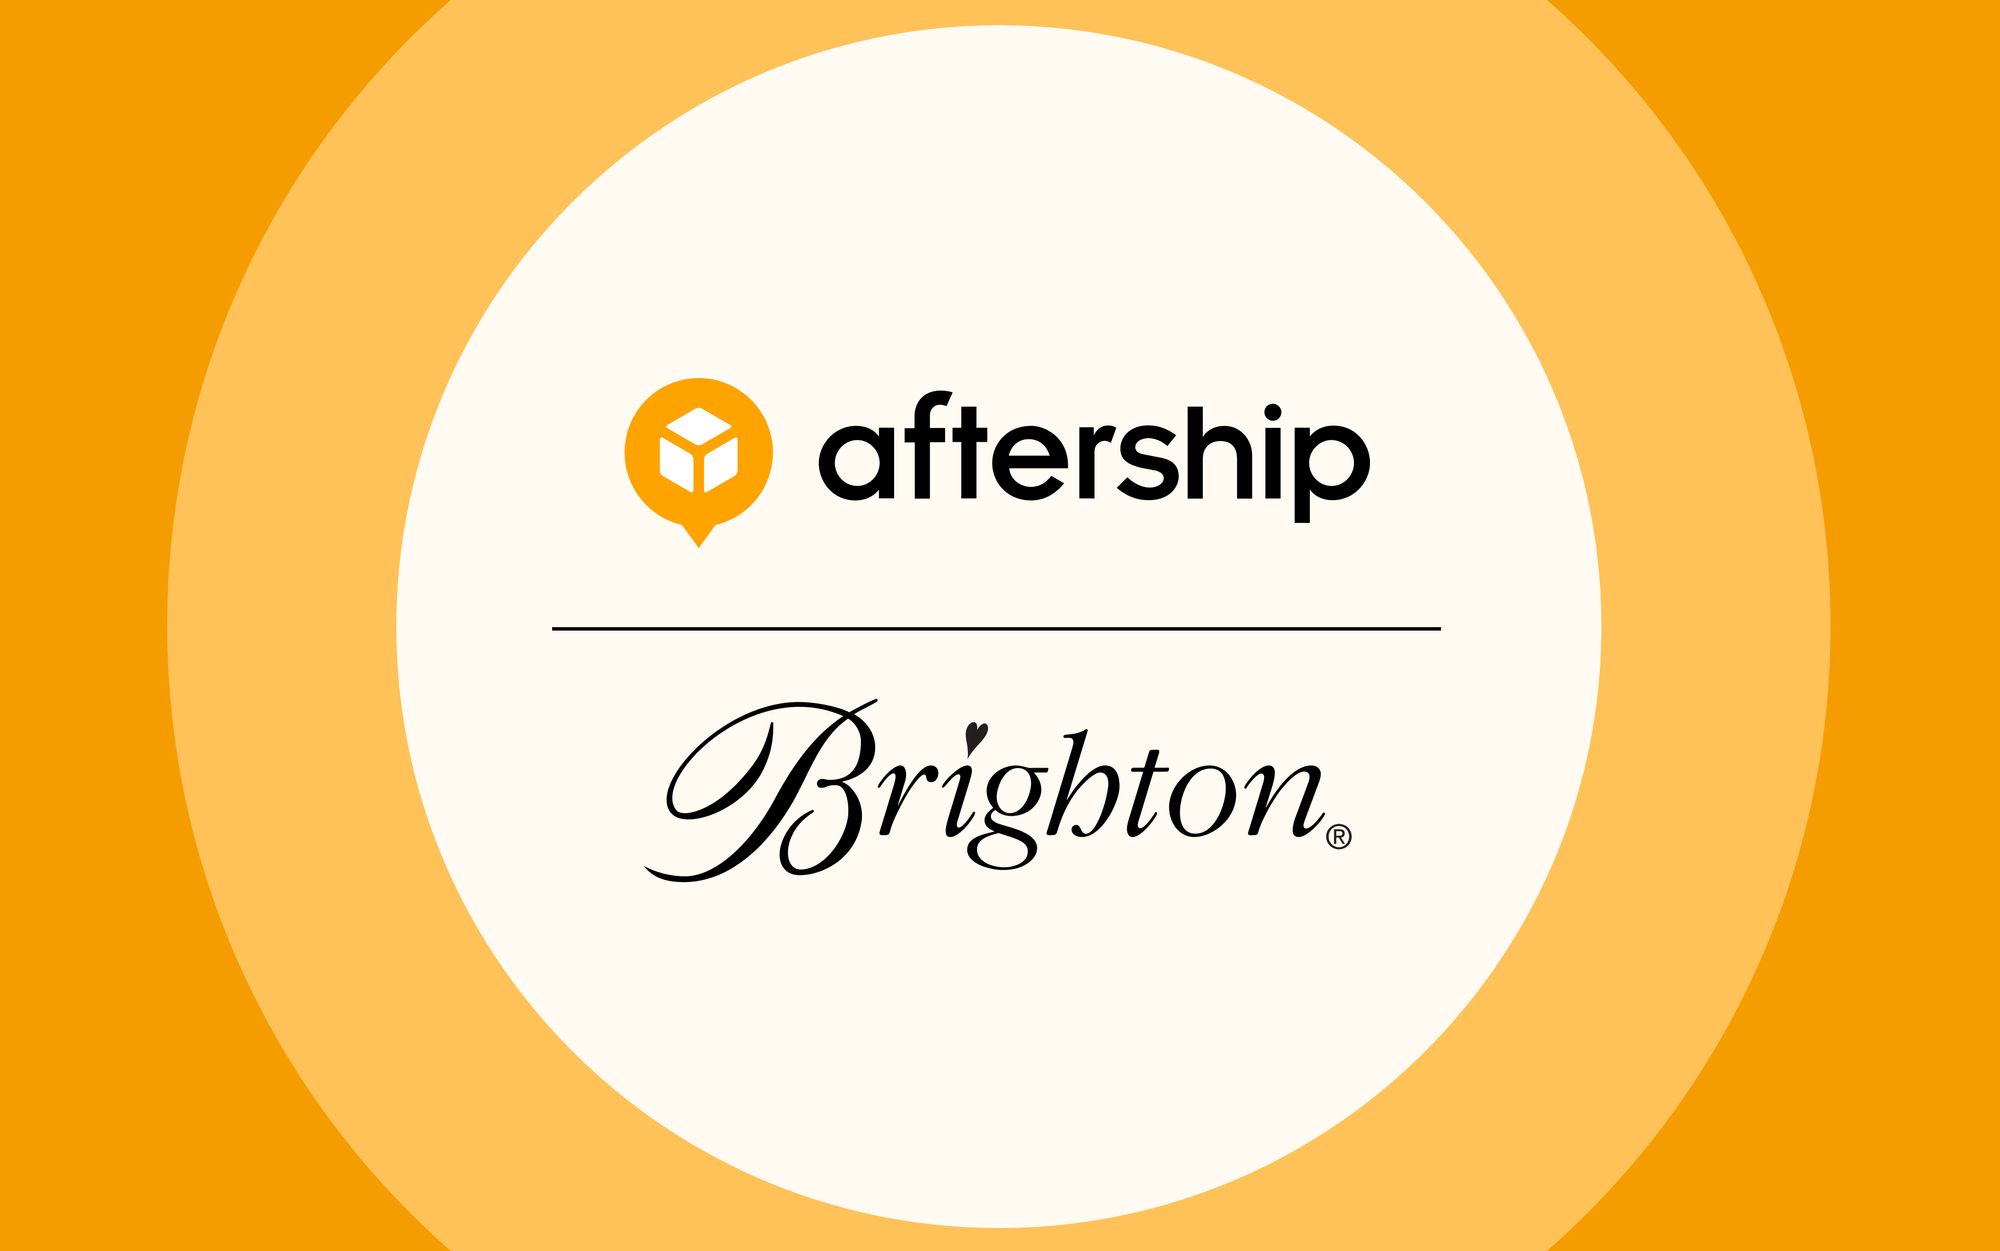 Why Classic American Jewelry Brand Brighton Switched to AfterShip